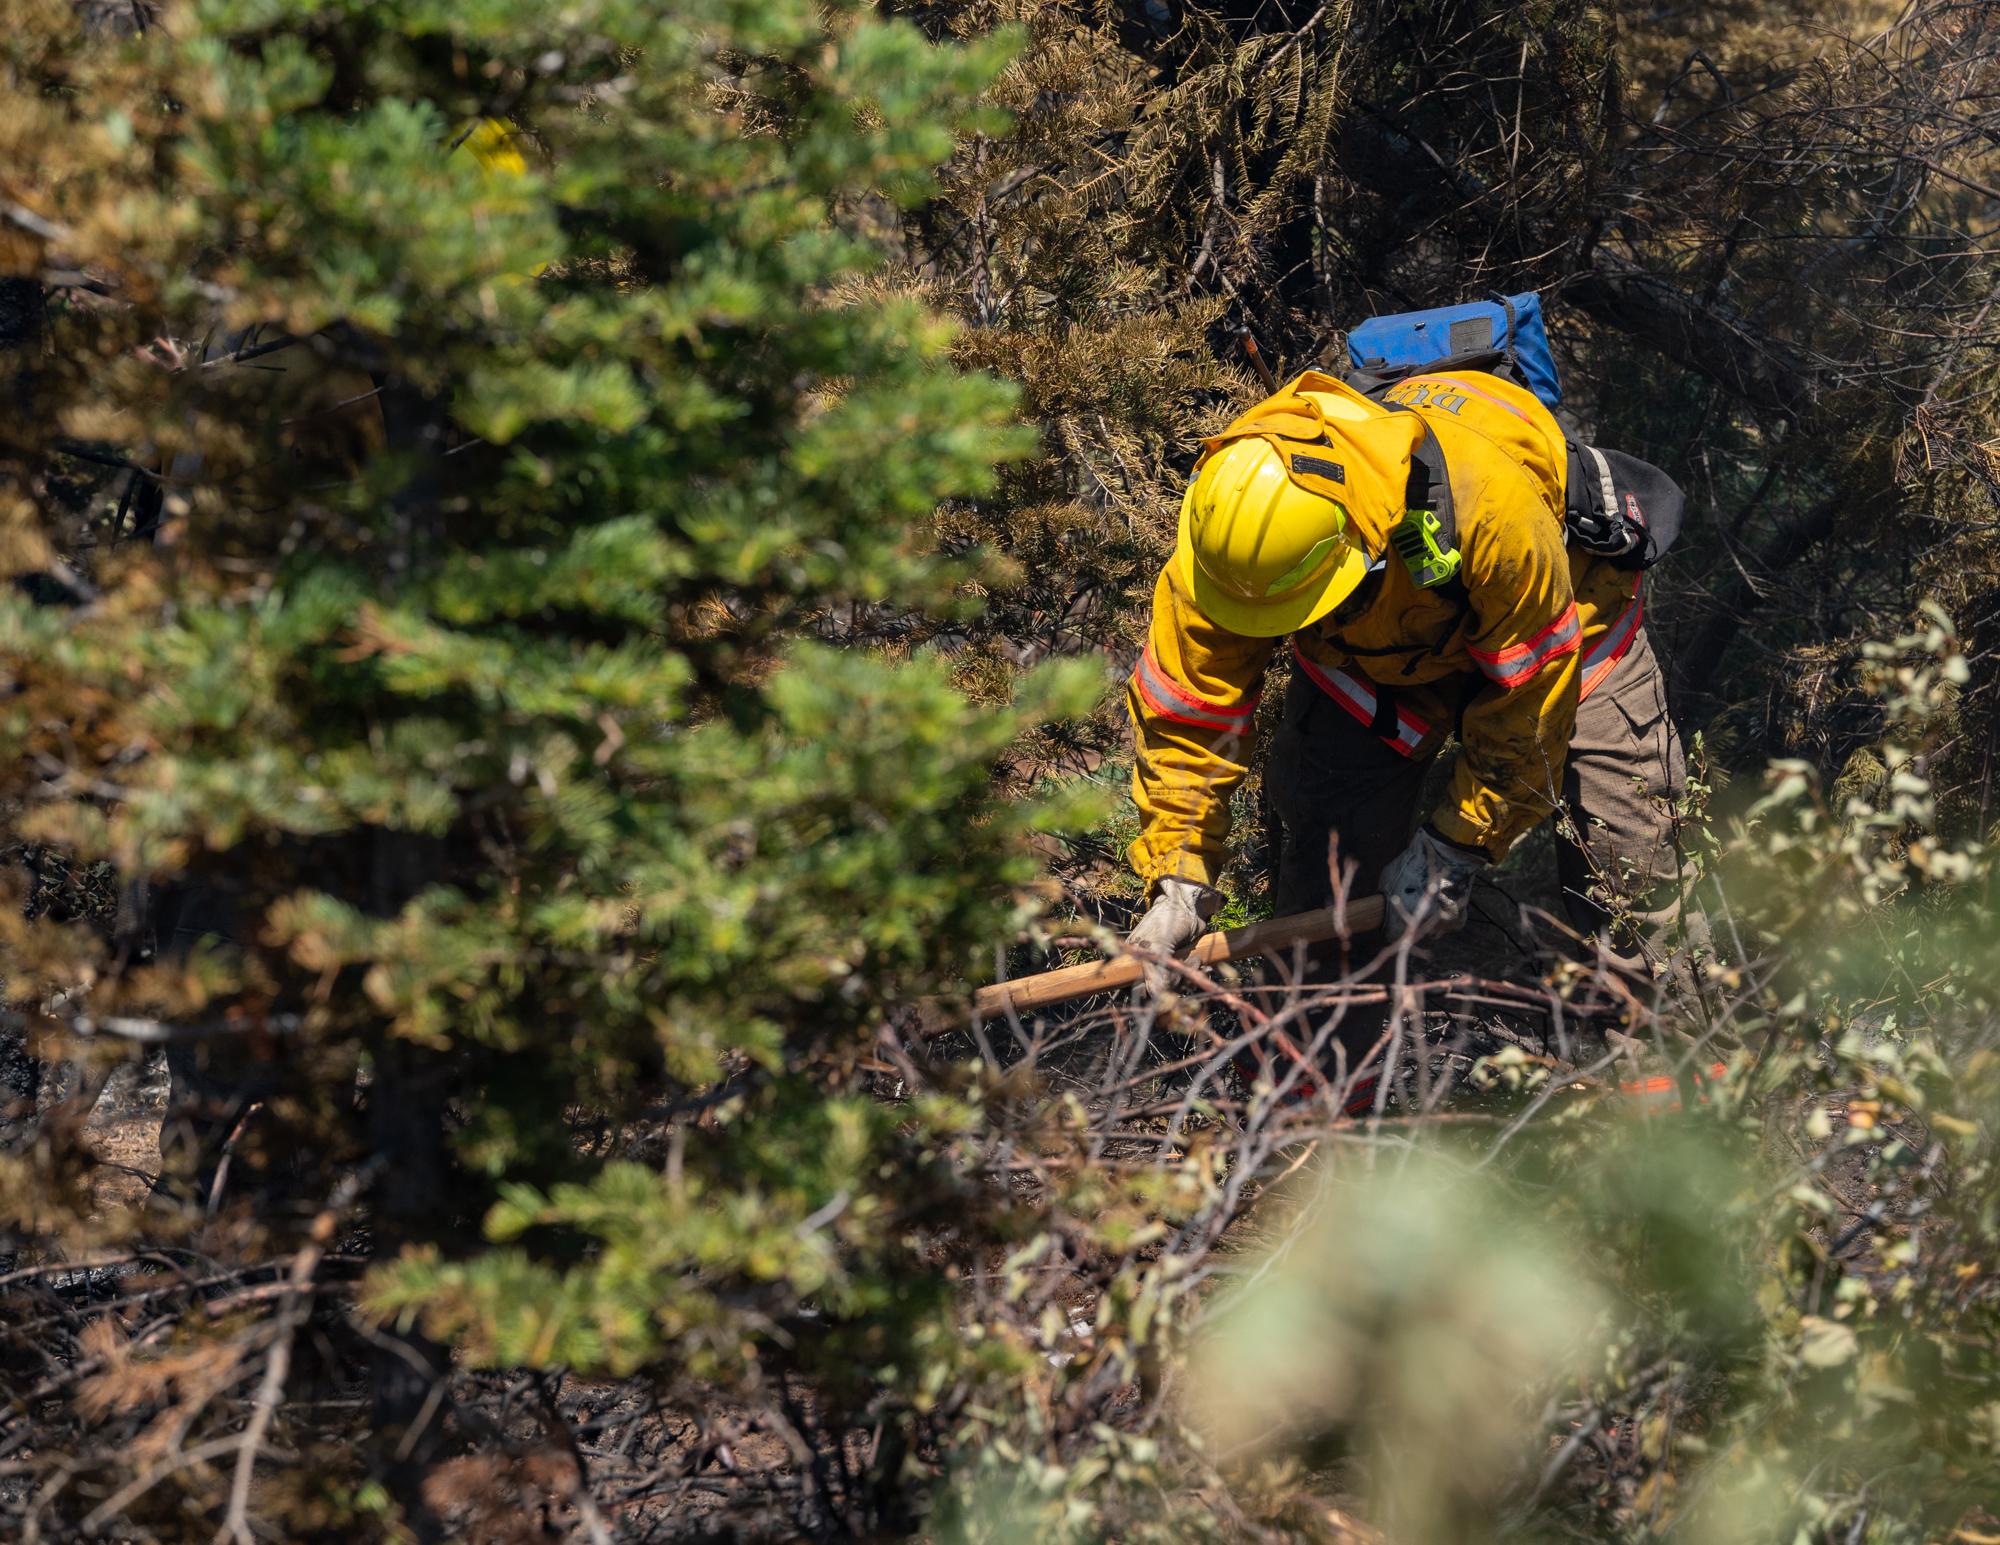 A Dundee firefighter conducting mop-up on the Golden Fire in Bonanza, Oregon, on July 24, 2023.